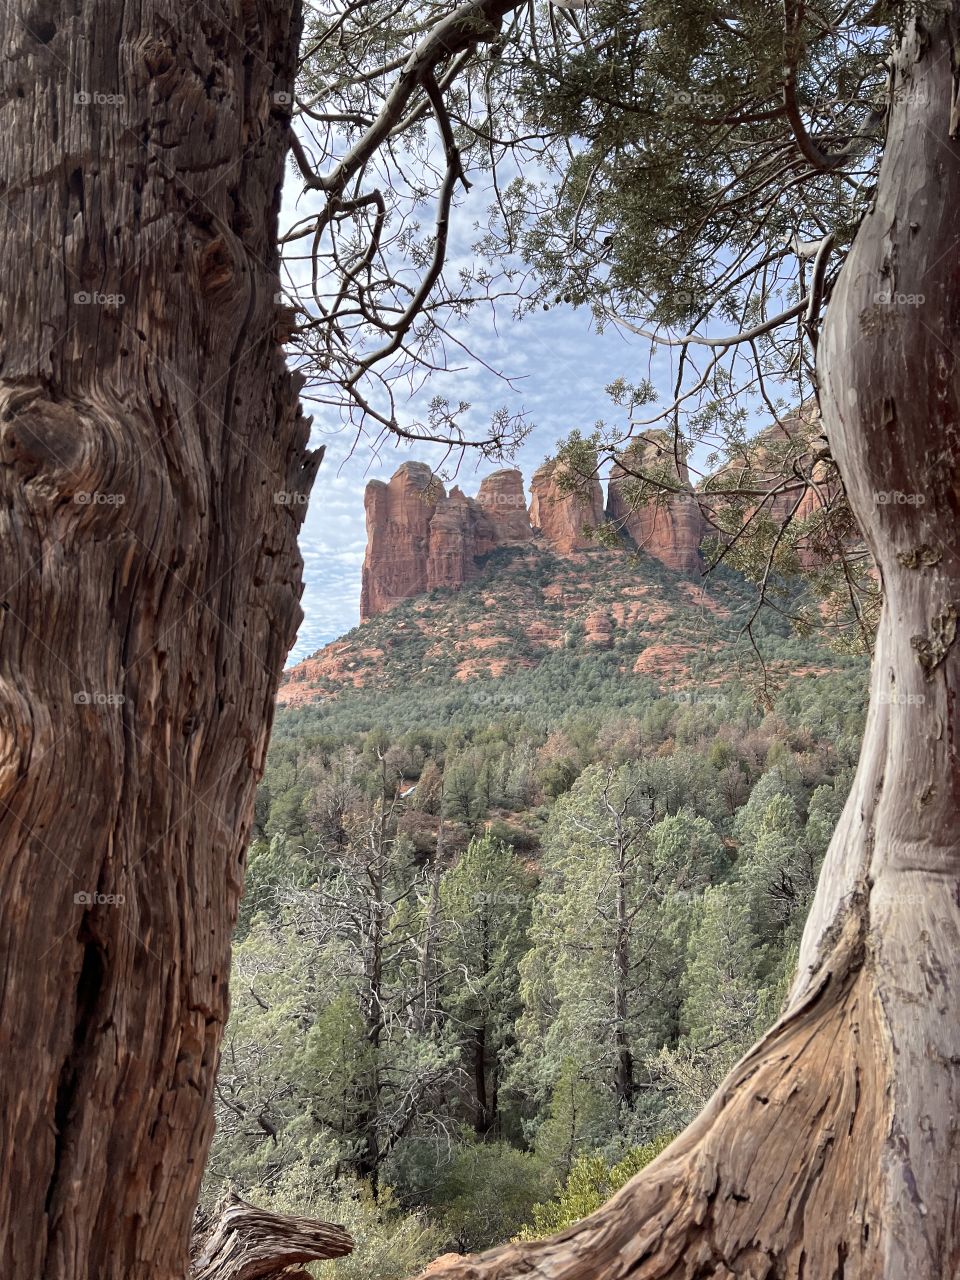 A view of the red rocks in Sedona through the trees